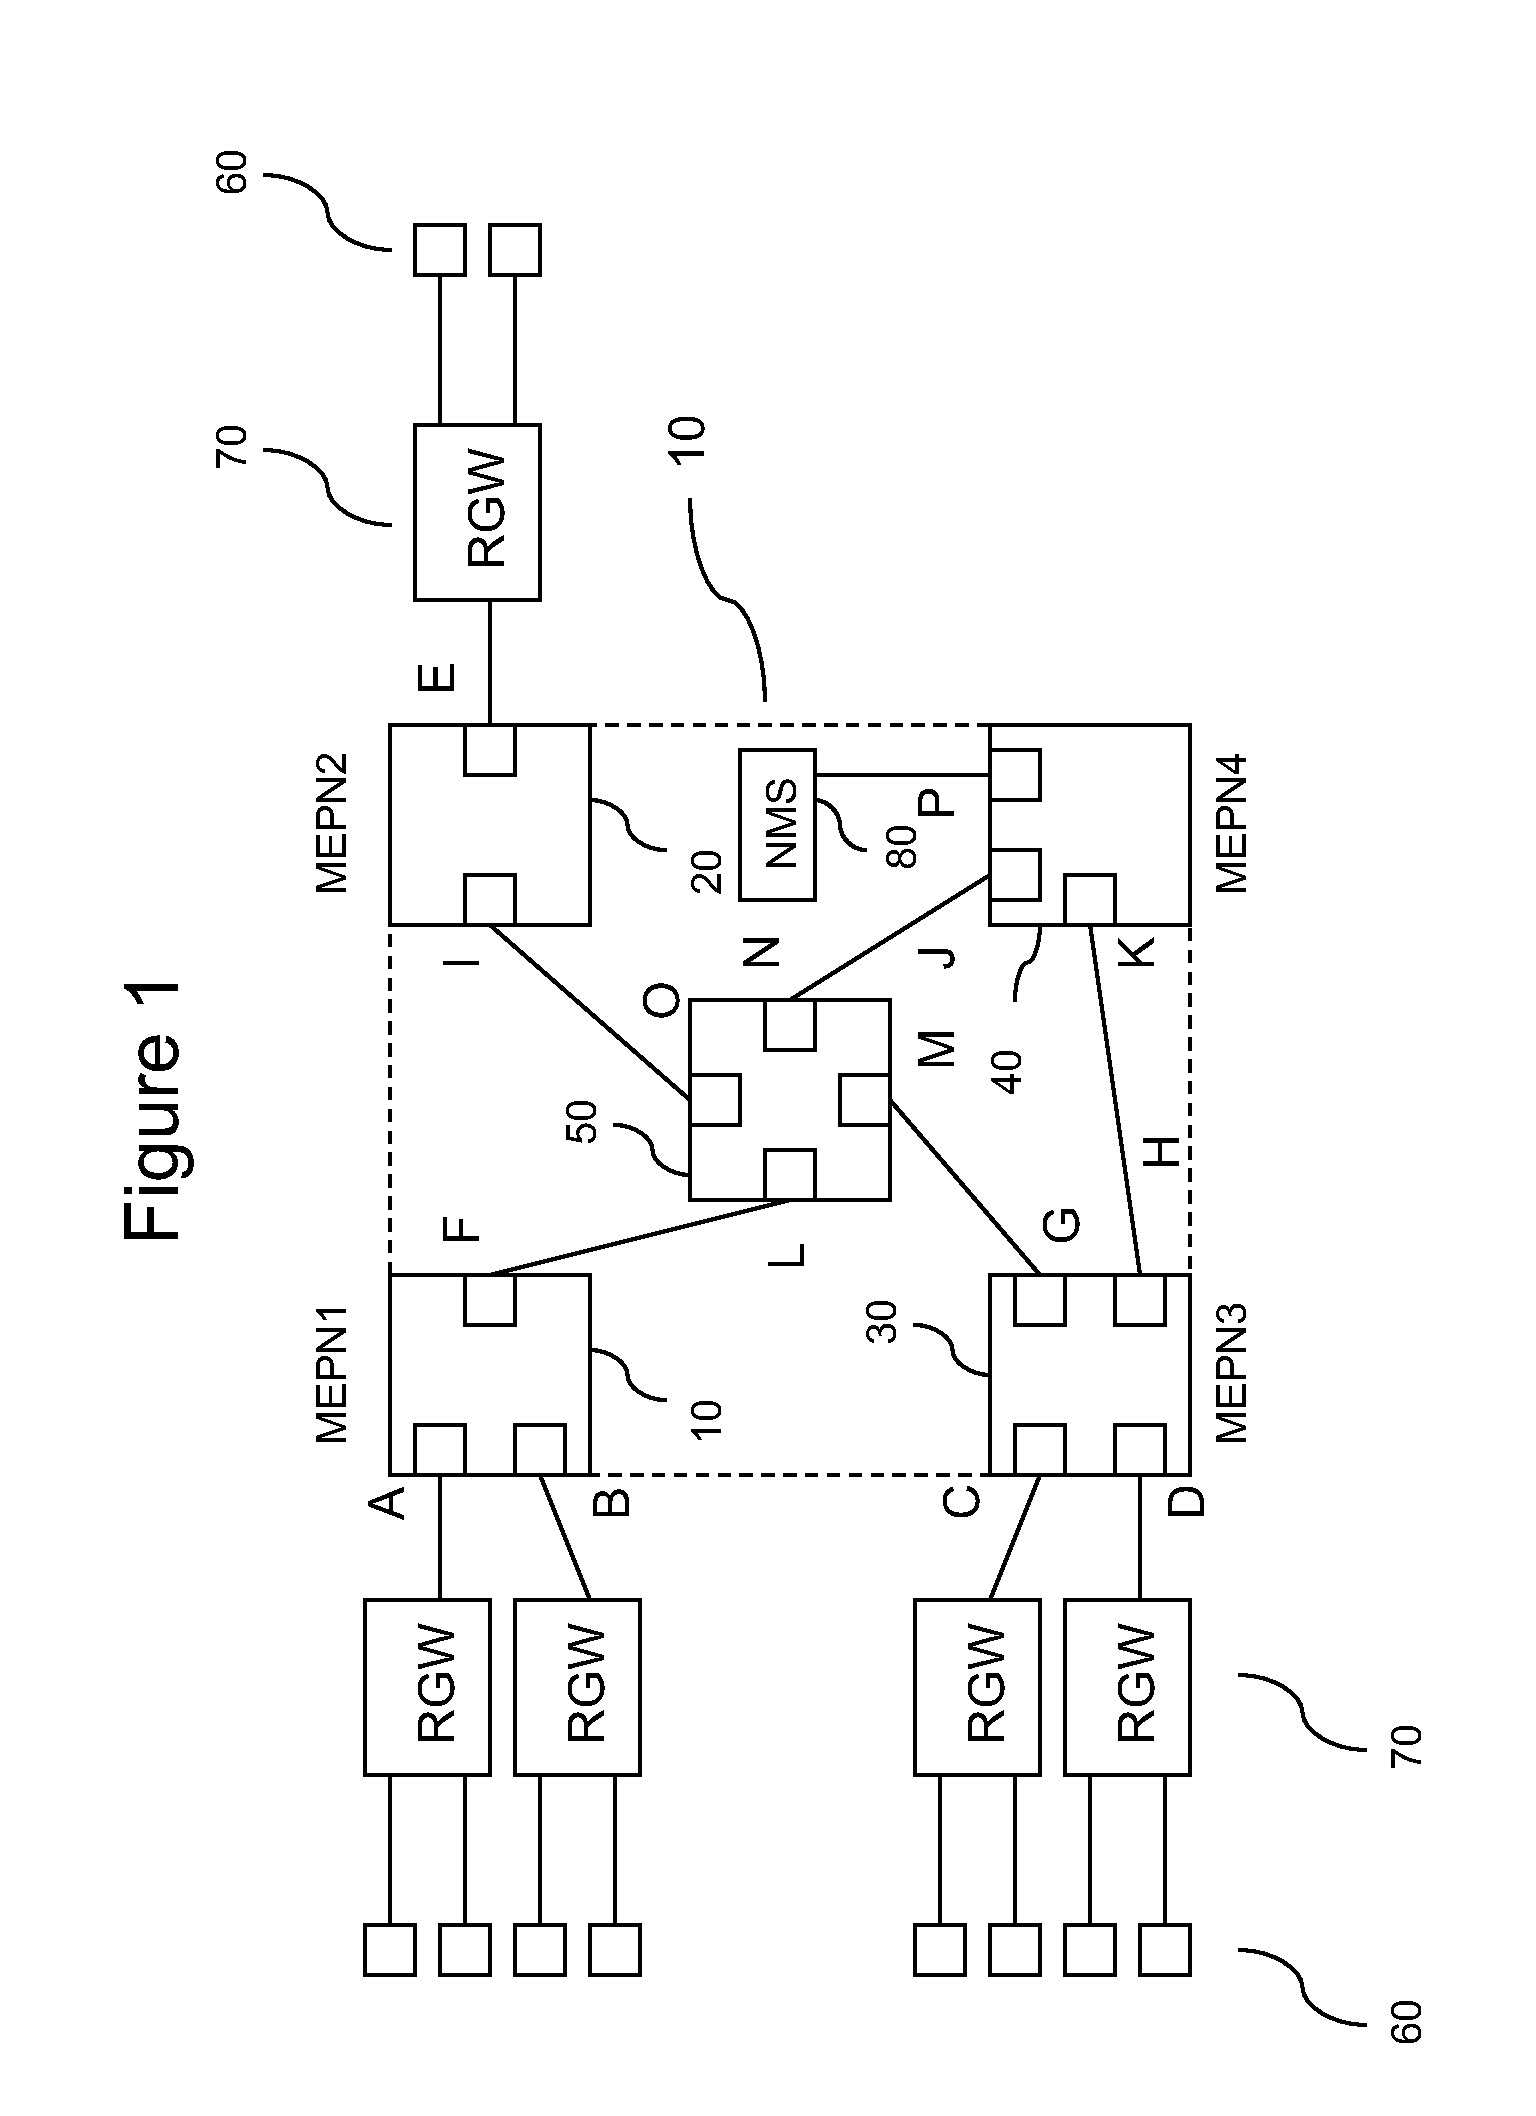 Logical Group Endpoint Discovery for Data Communication Network